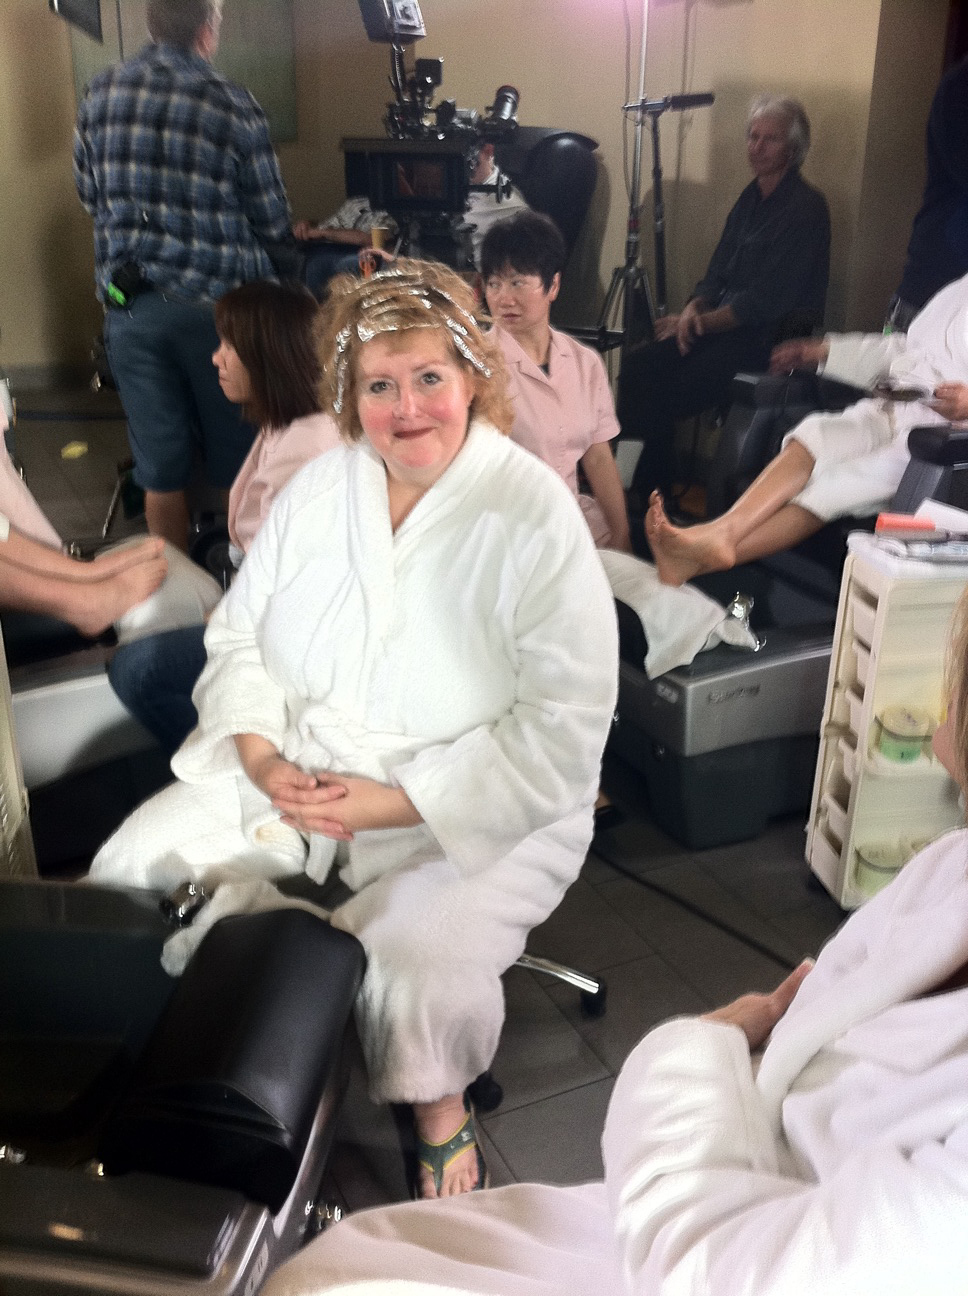 Tracy Weisert on MODERN FAMILY for Phil's spa day with the girls